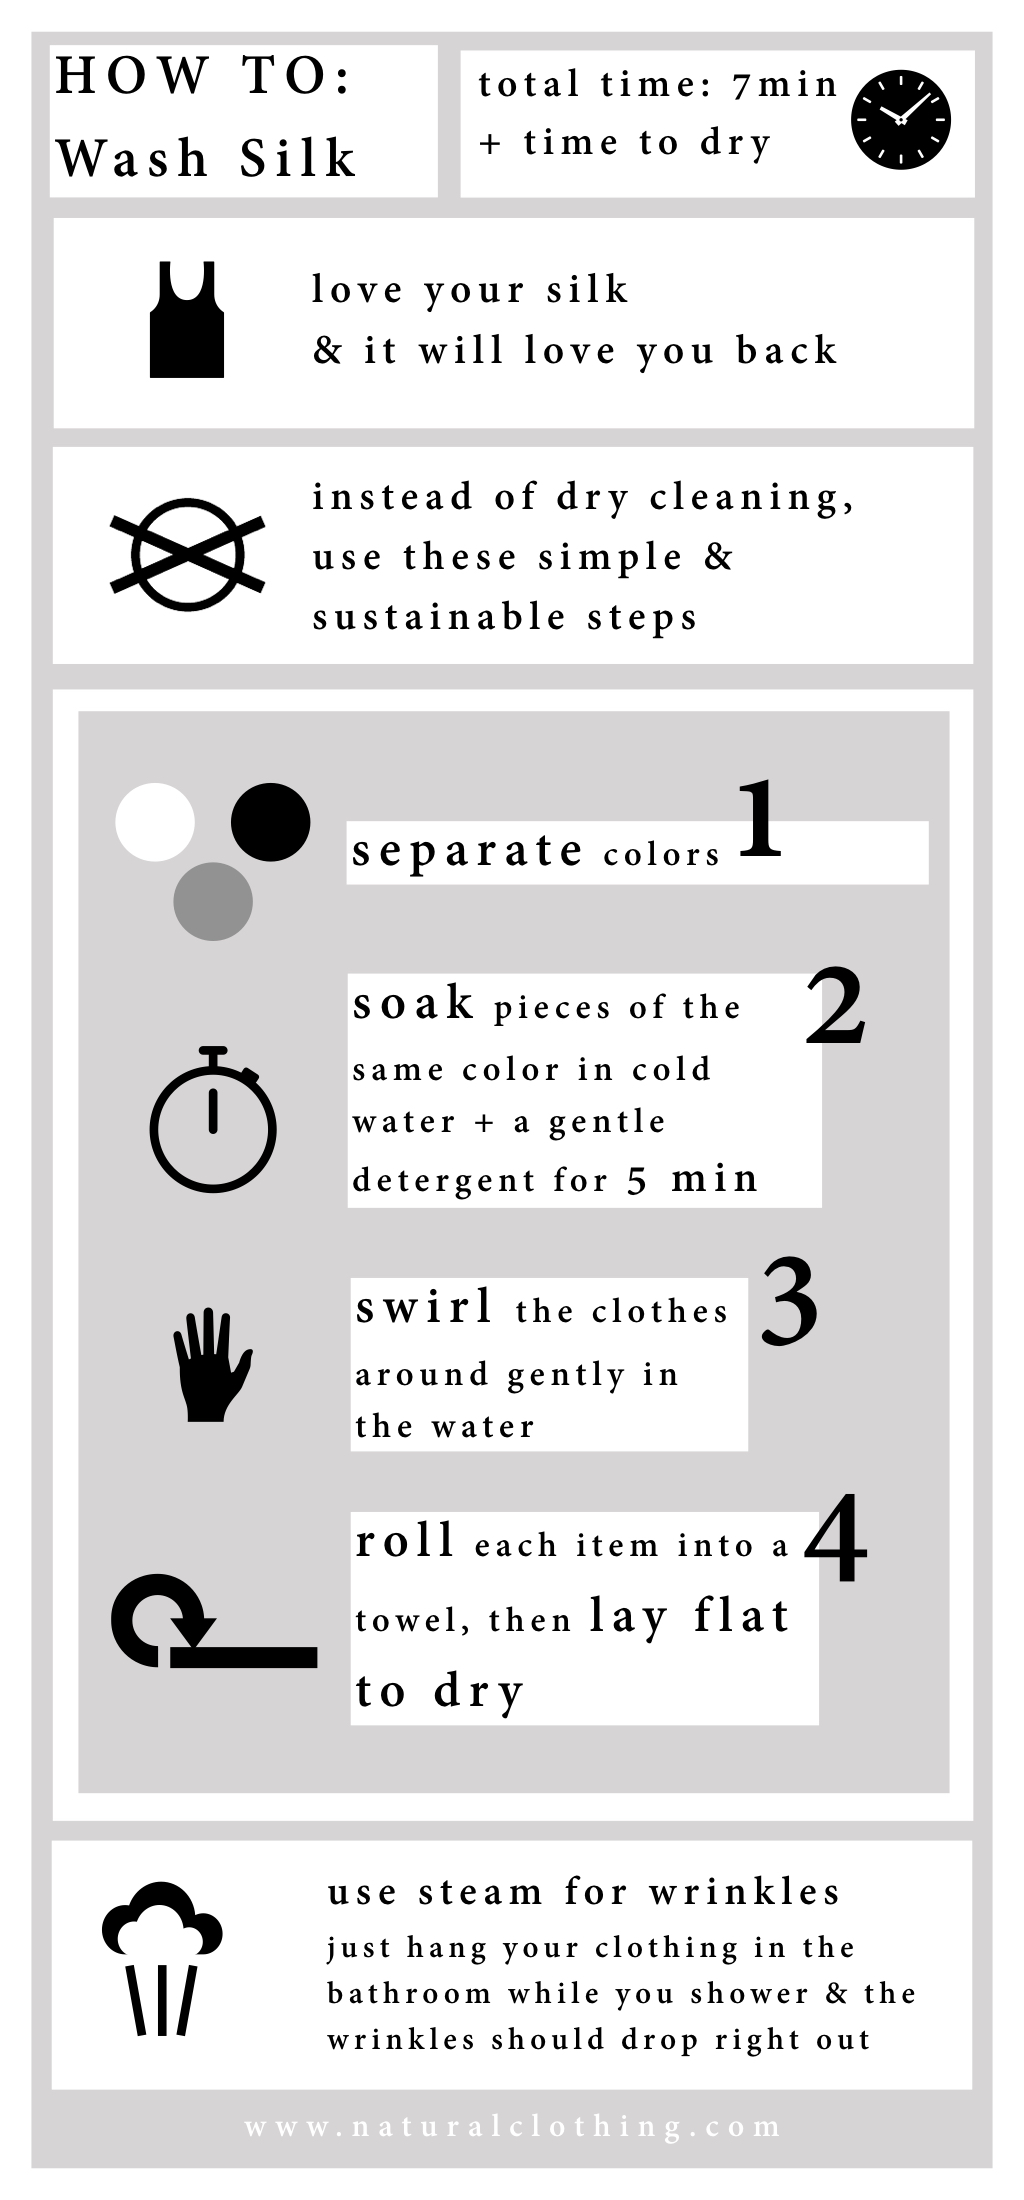 how to wash silk sustainably infographic